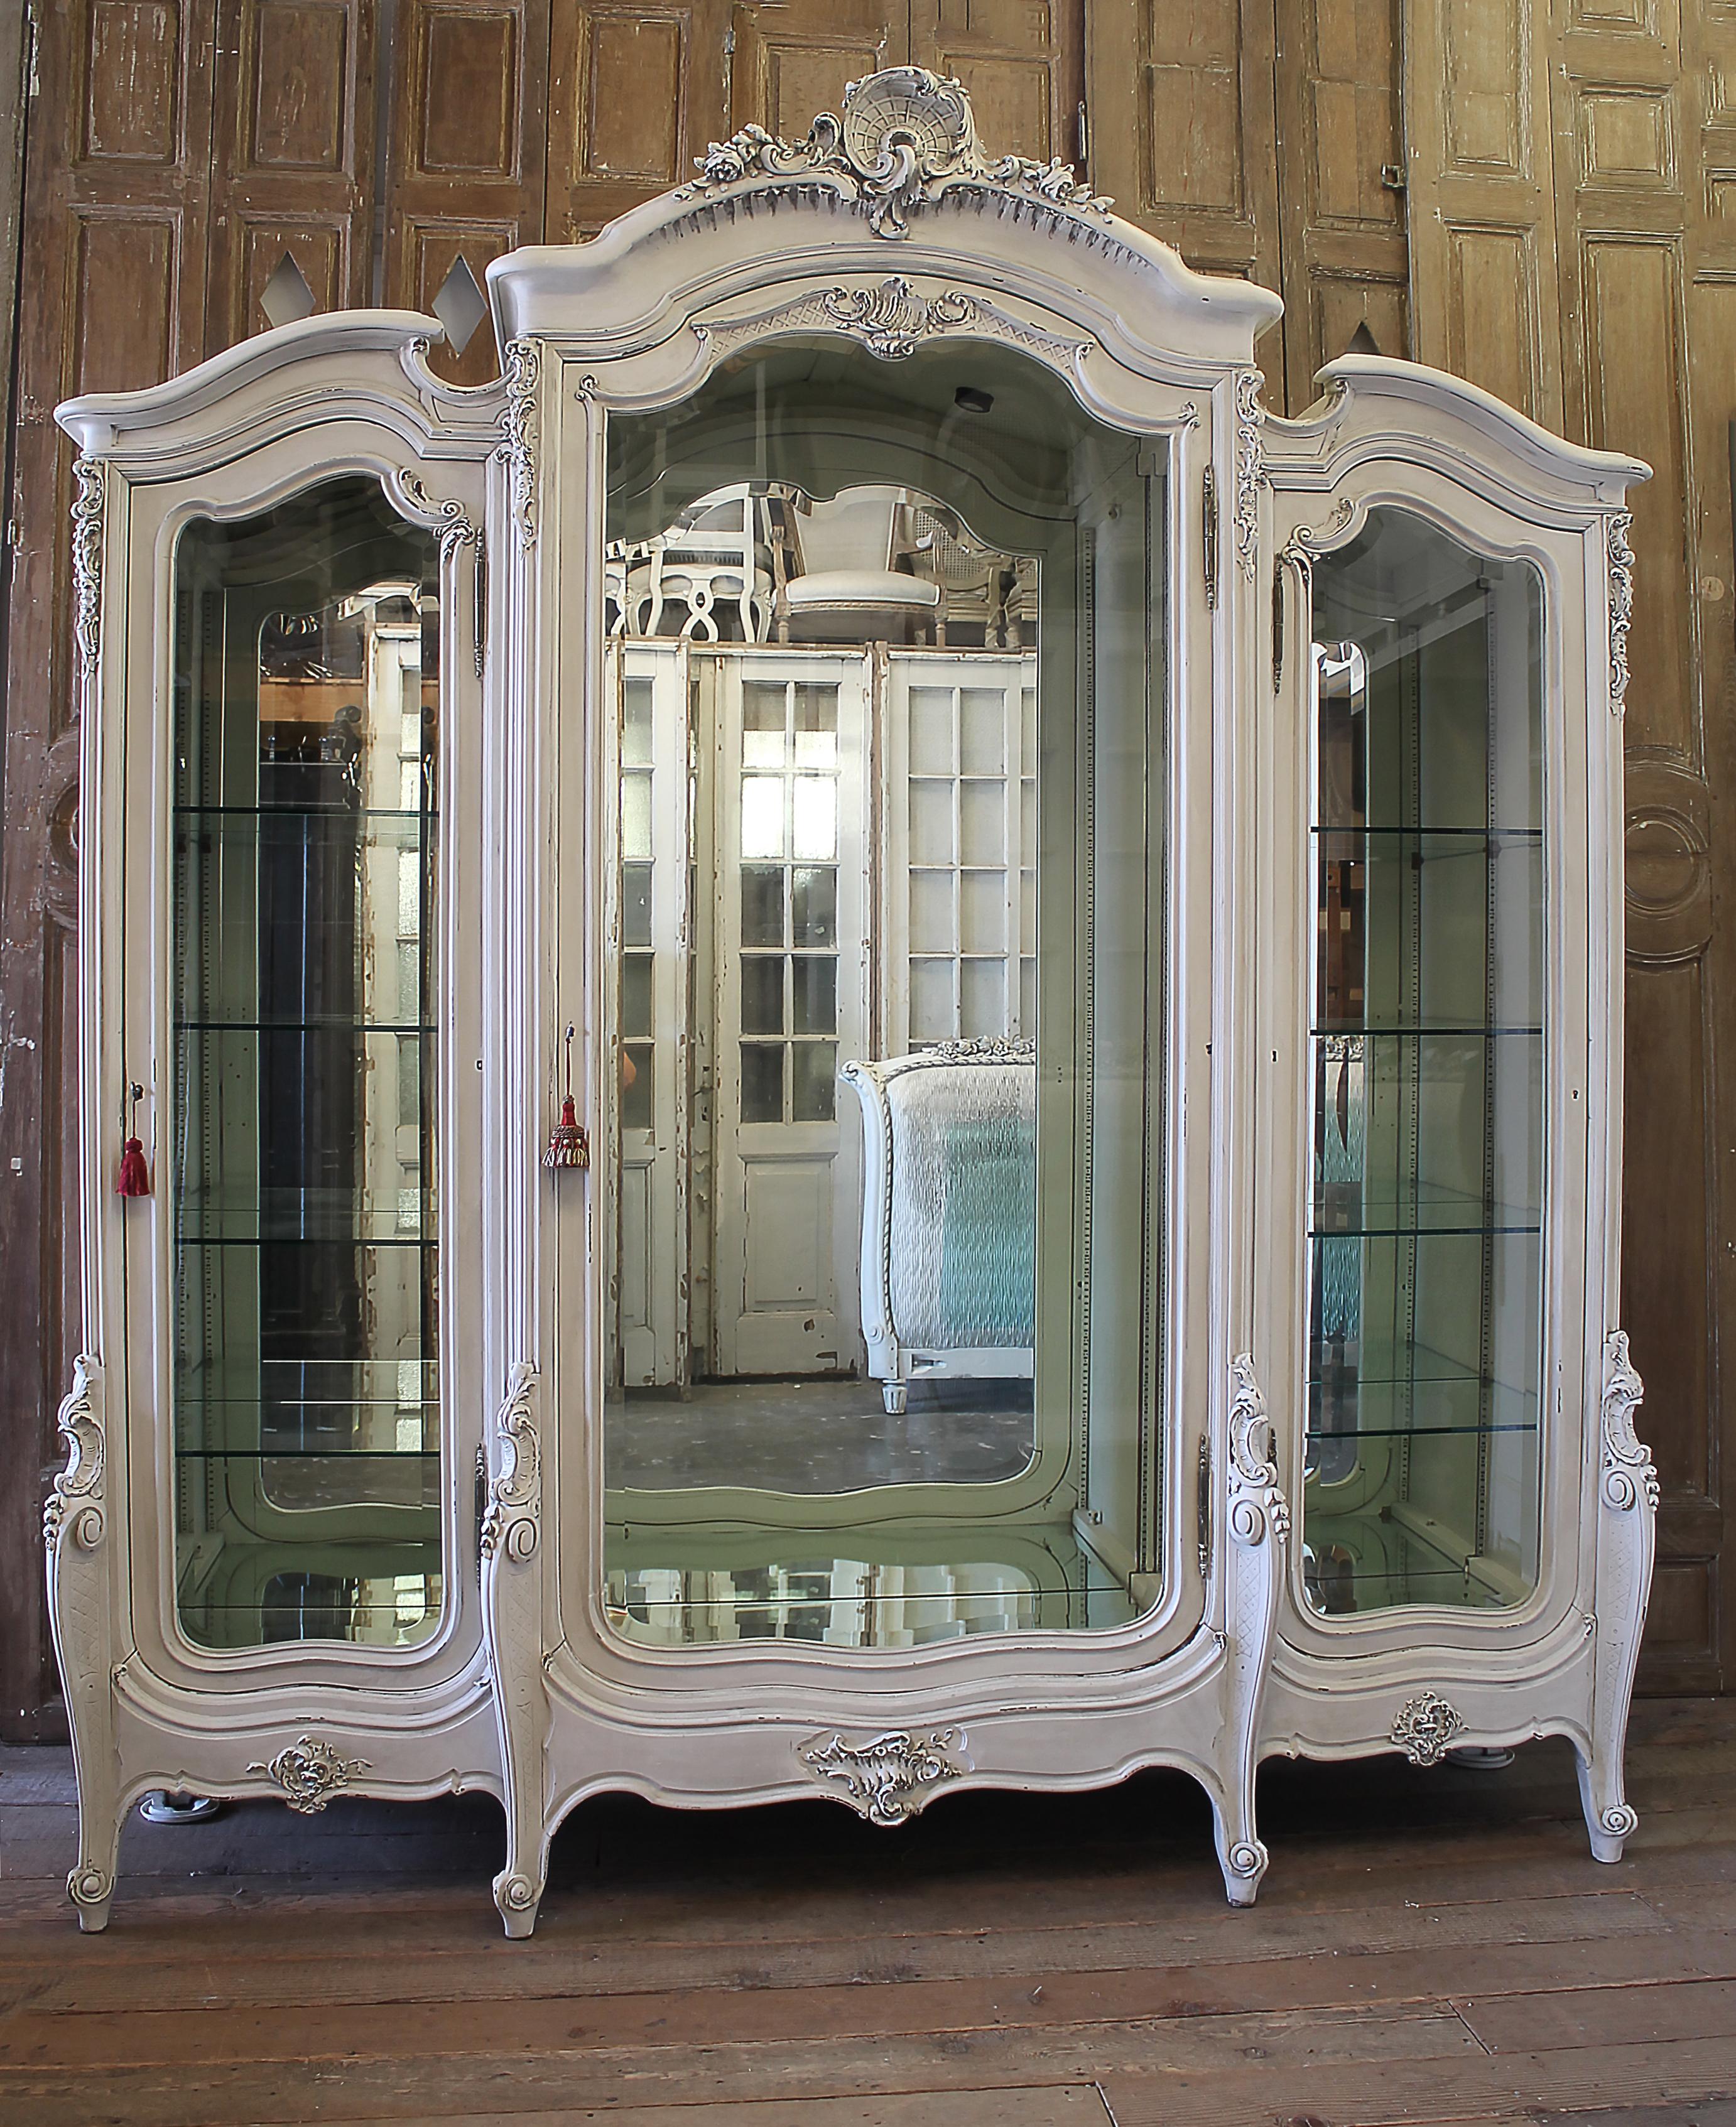 Antique Painted French Louis XV style carved display armoire
Painted in a soft white with subtle distressed edges, and antique glazed patina. Beautiful armoire for display has glass shelved in the sides that are fully adjustable. We will have 4